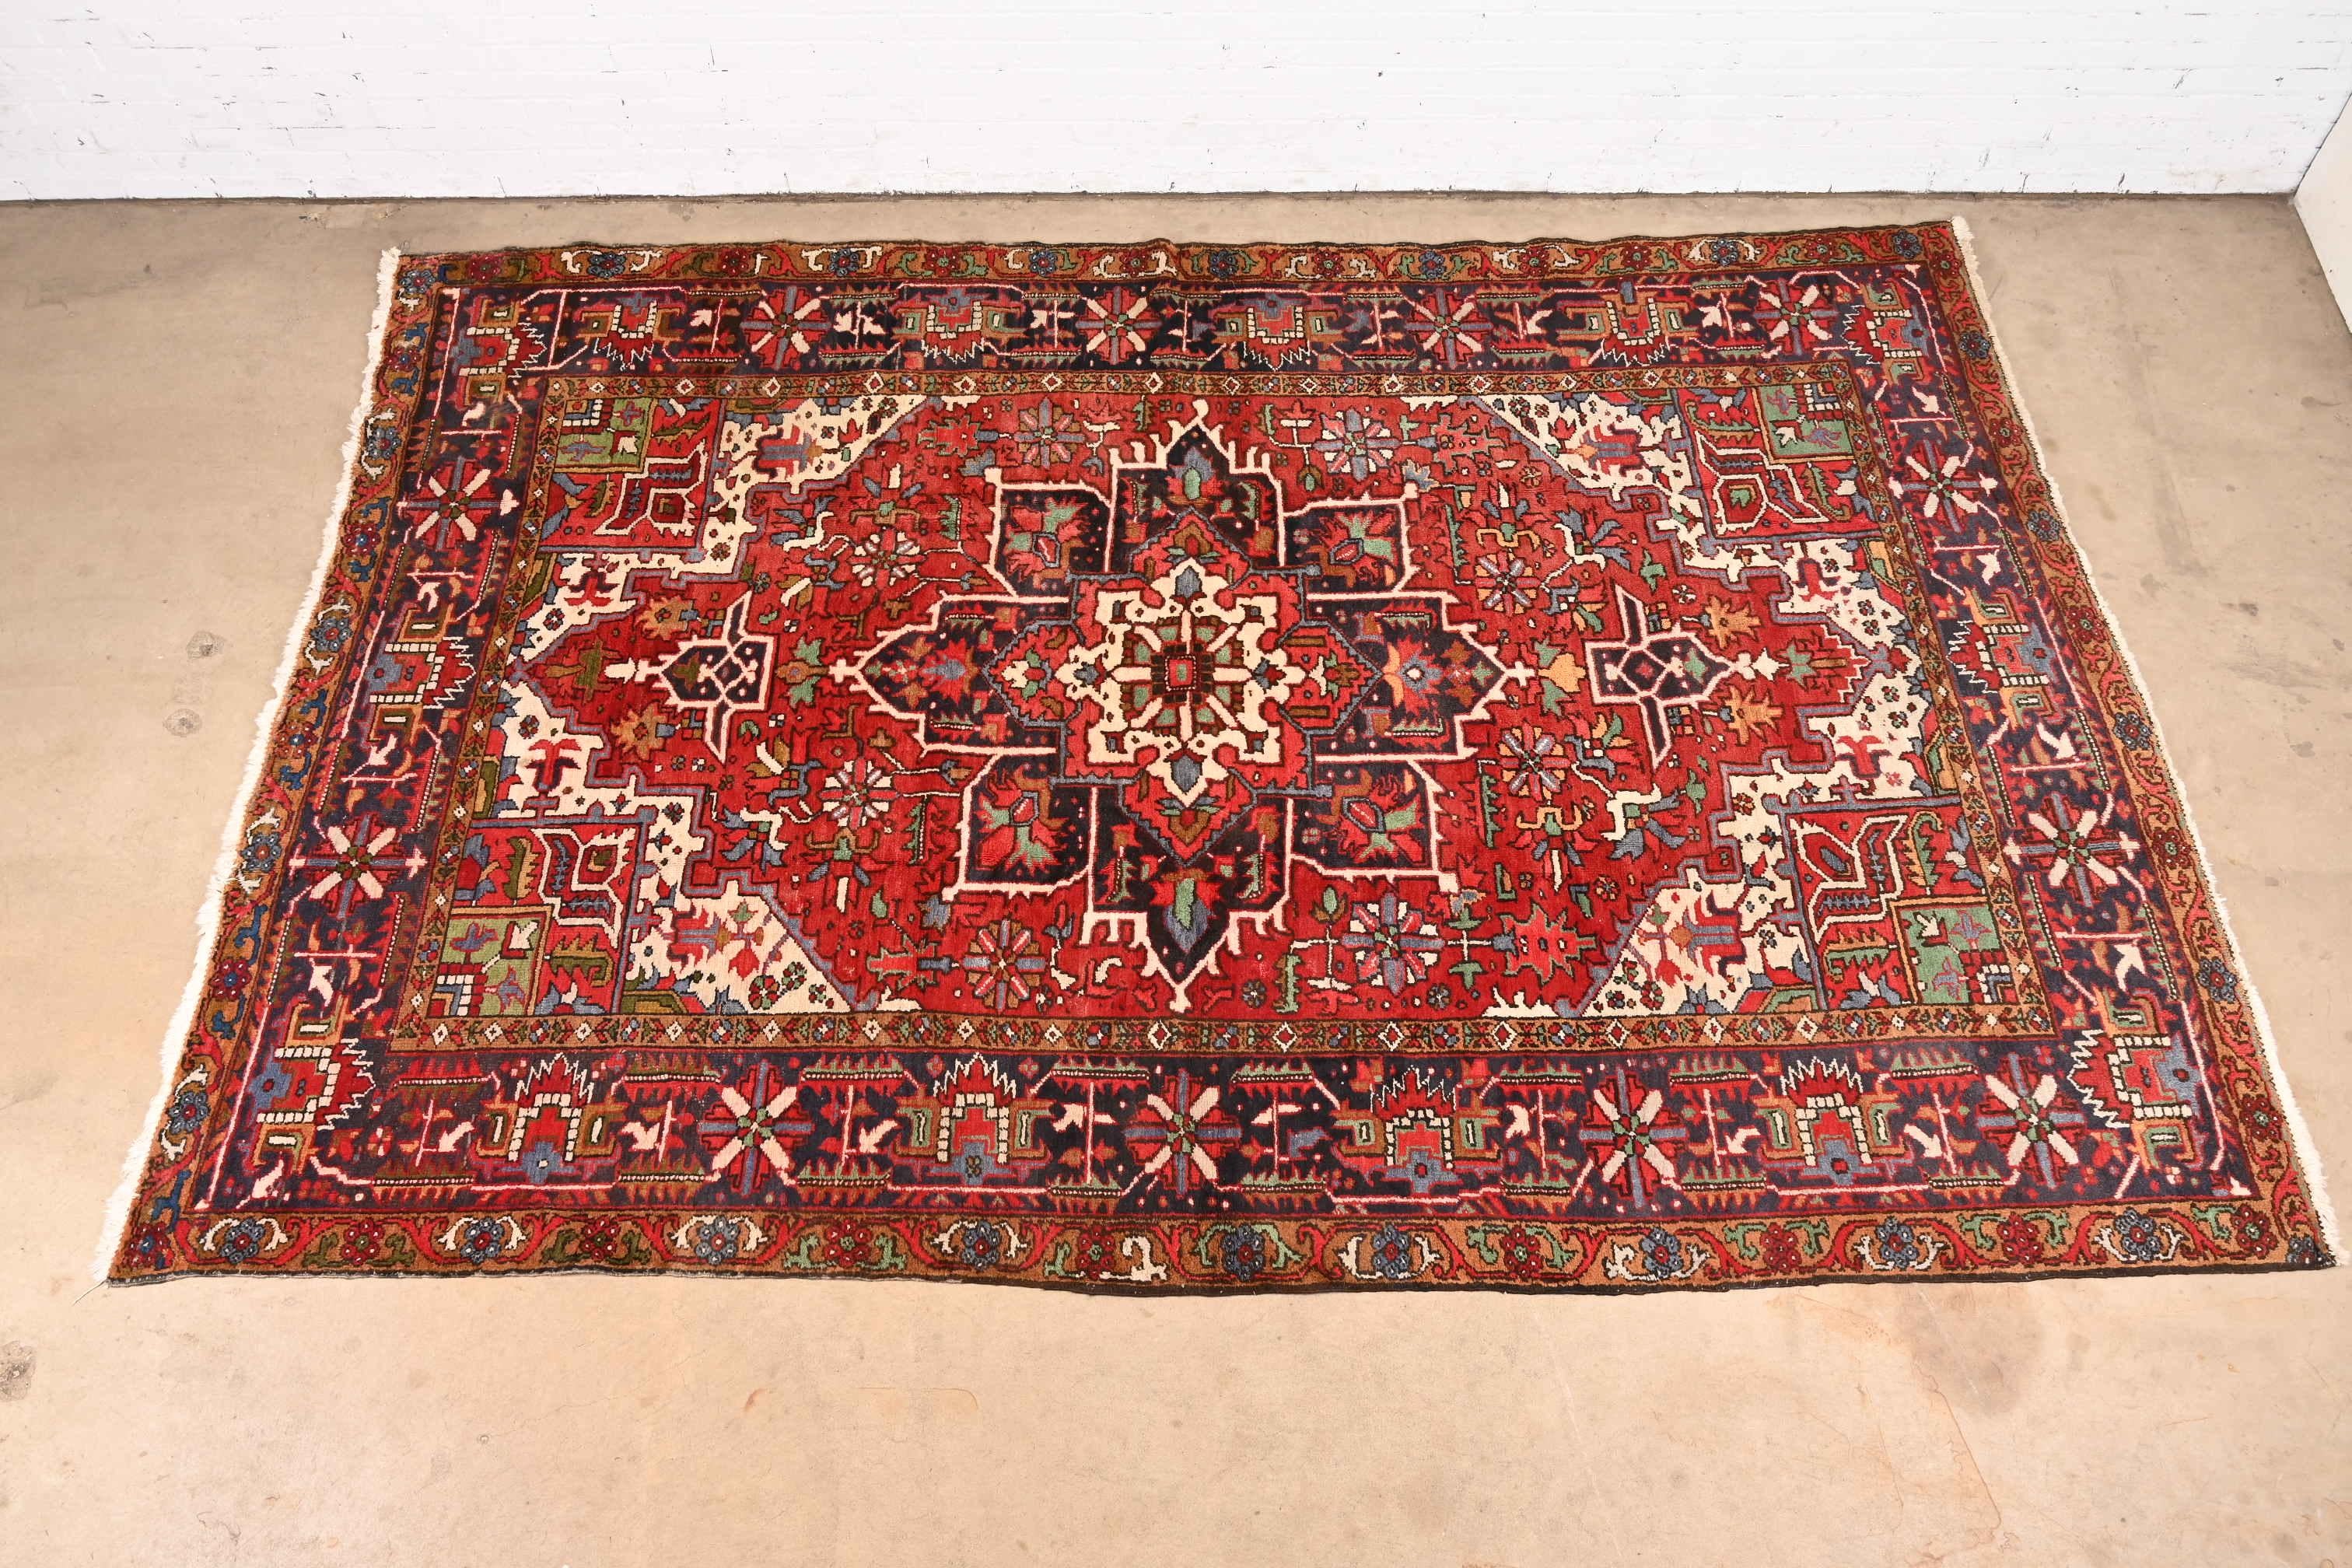 A gorgeous vintage hand-knotted Persian Heriz room size wool rug

Mid-20th Century

Beautiful geometric floral design, with predominant colors in red, blue, gold, green, and ivory.

Measures: 7'8